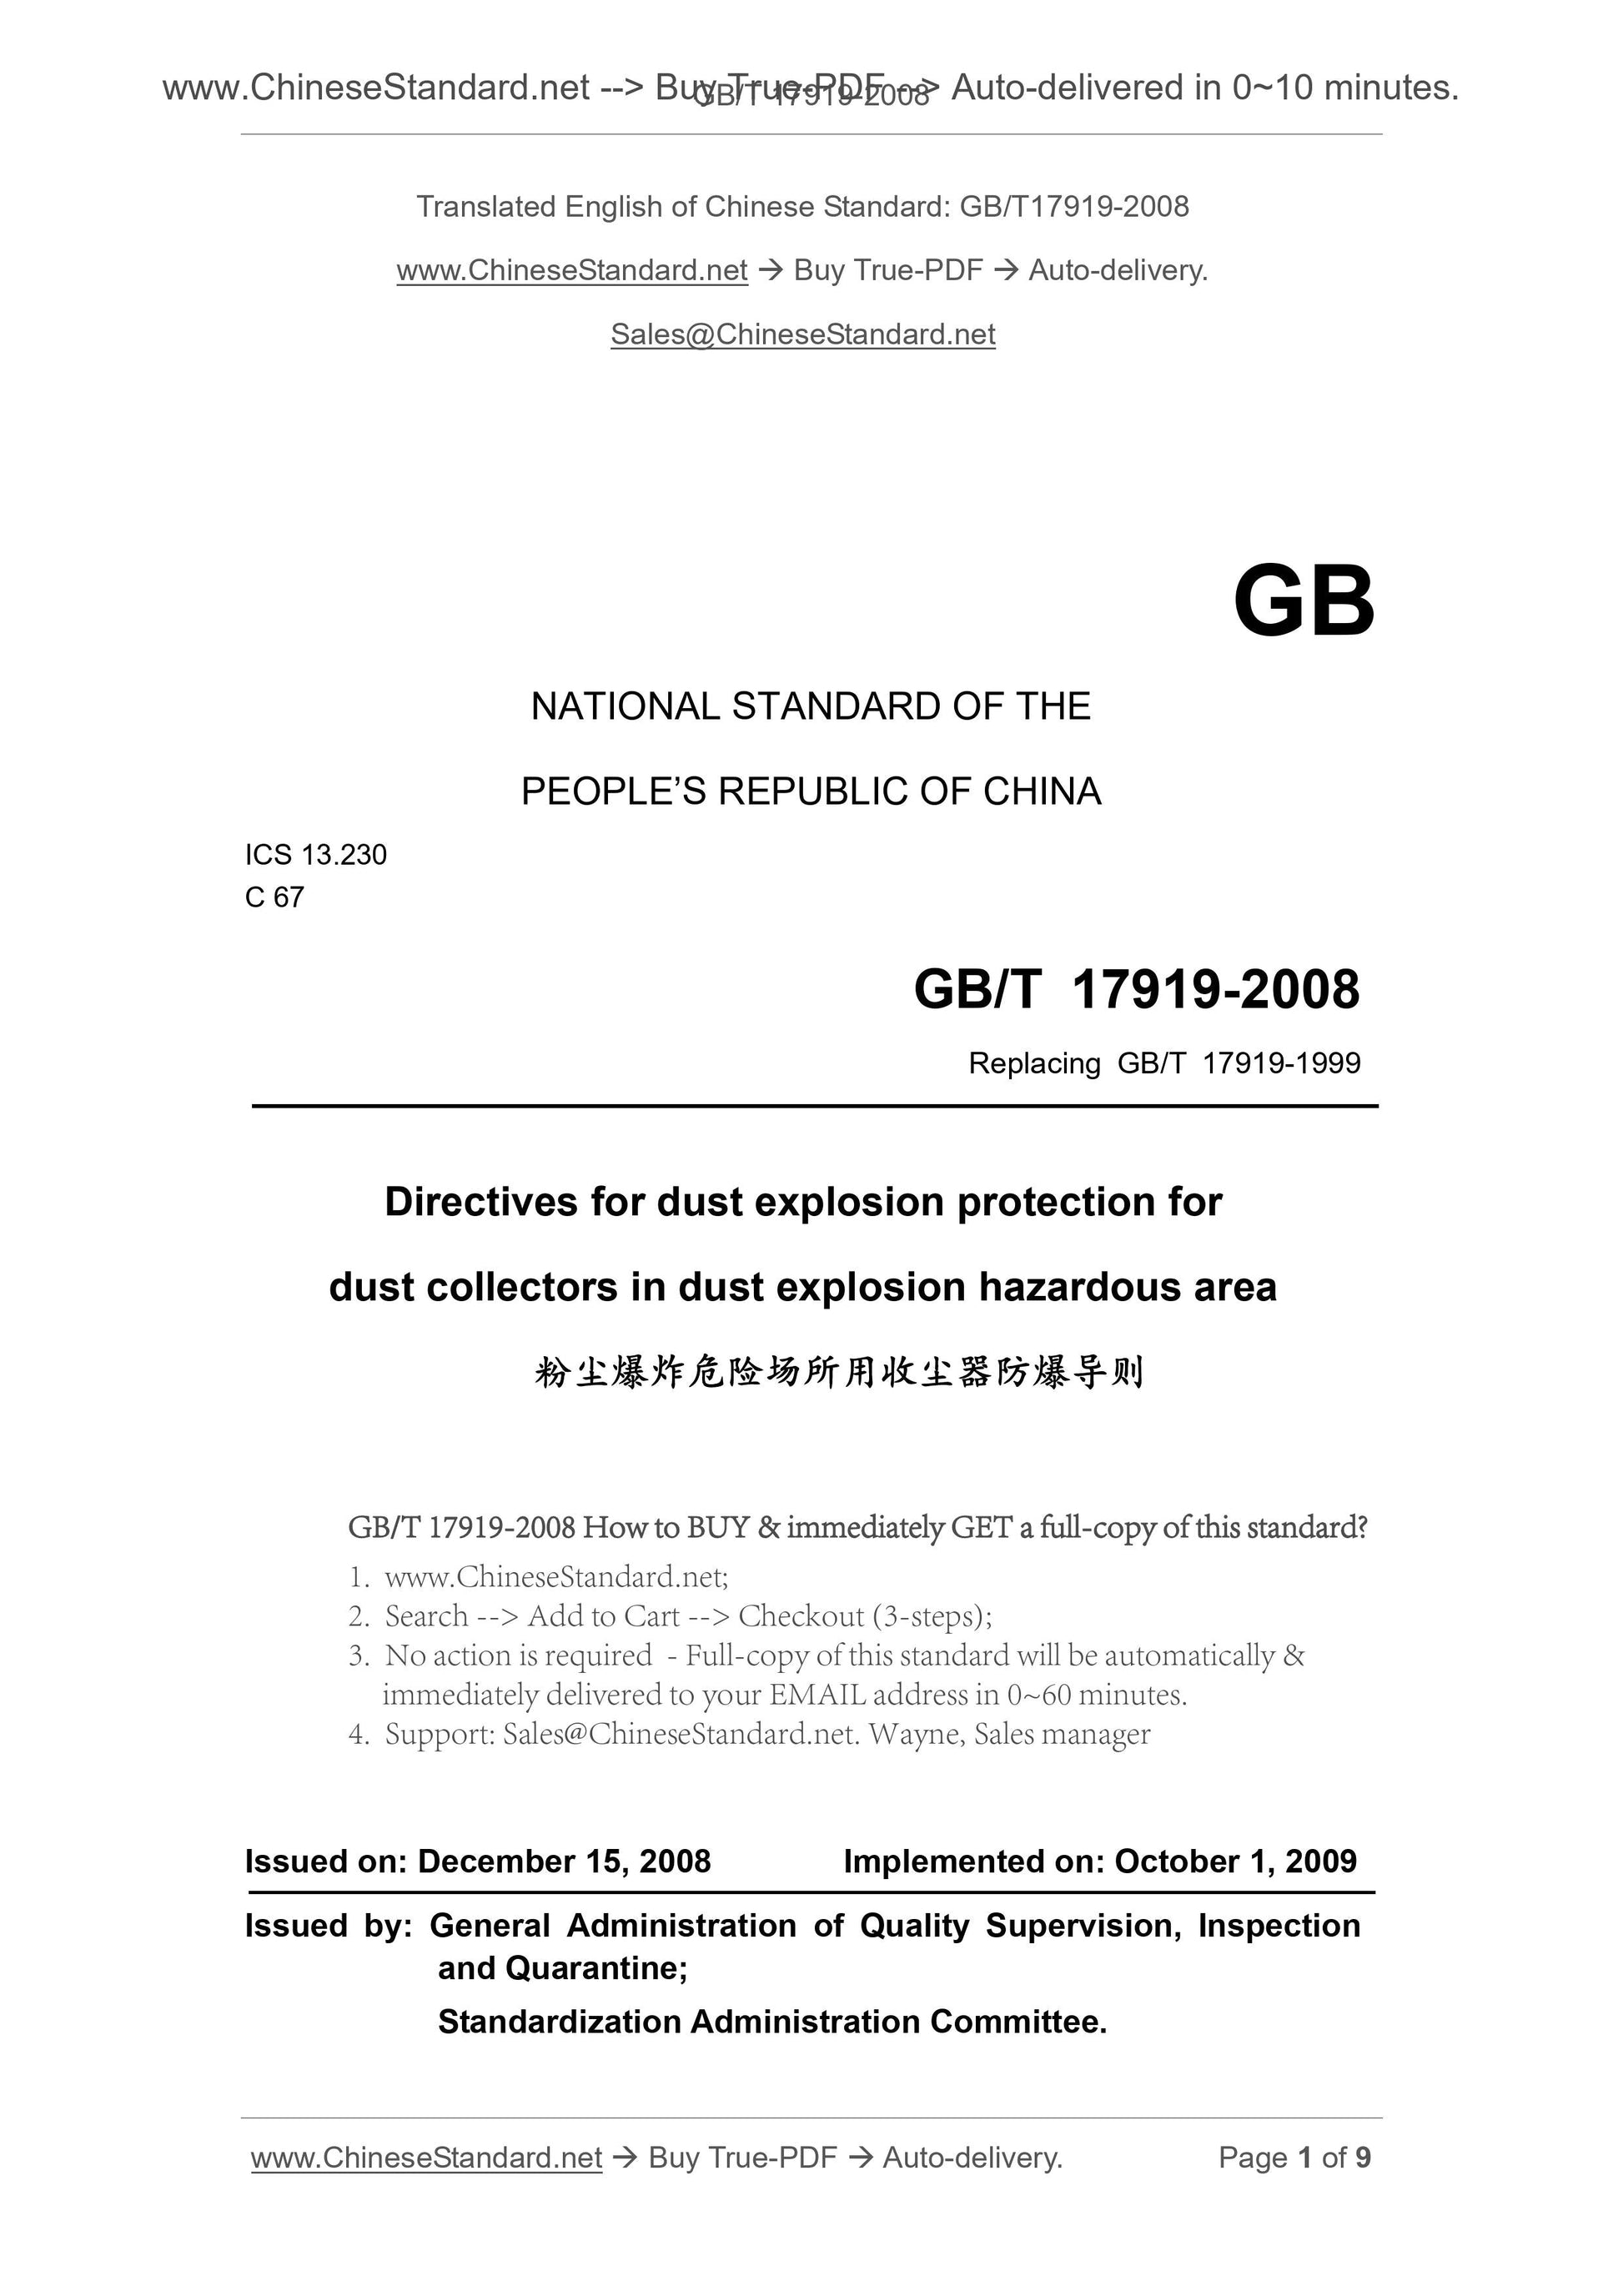 GB/T 17919-2008 Page 1